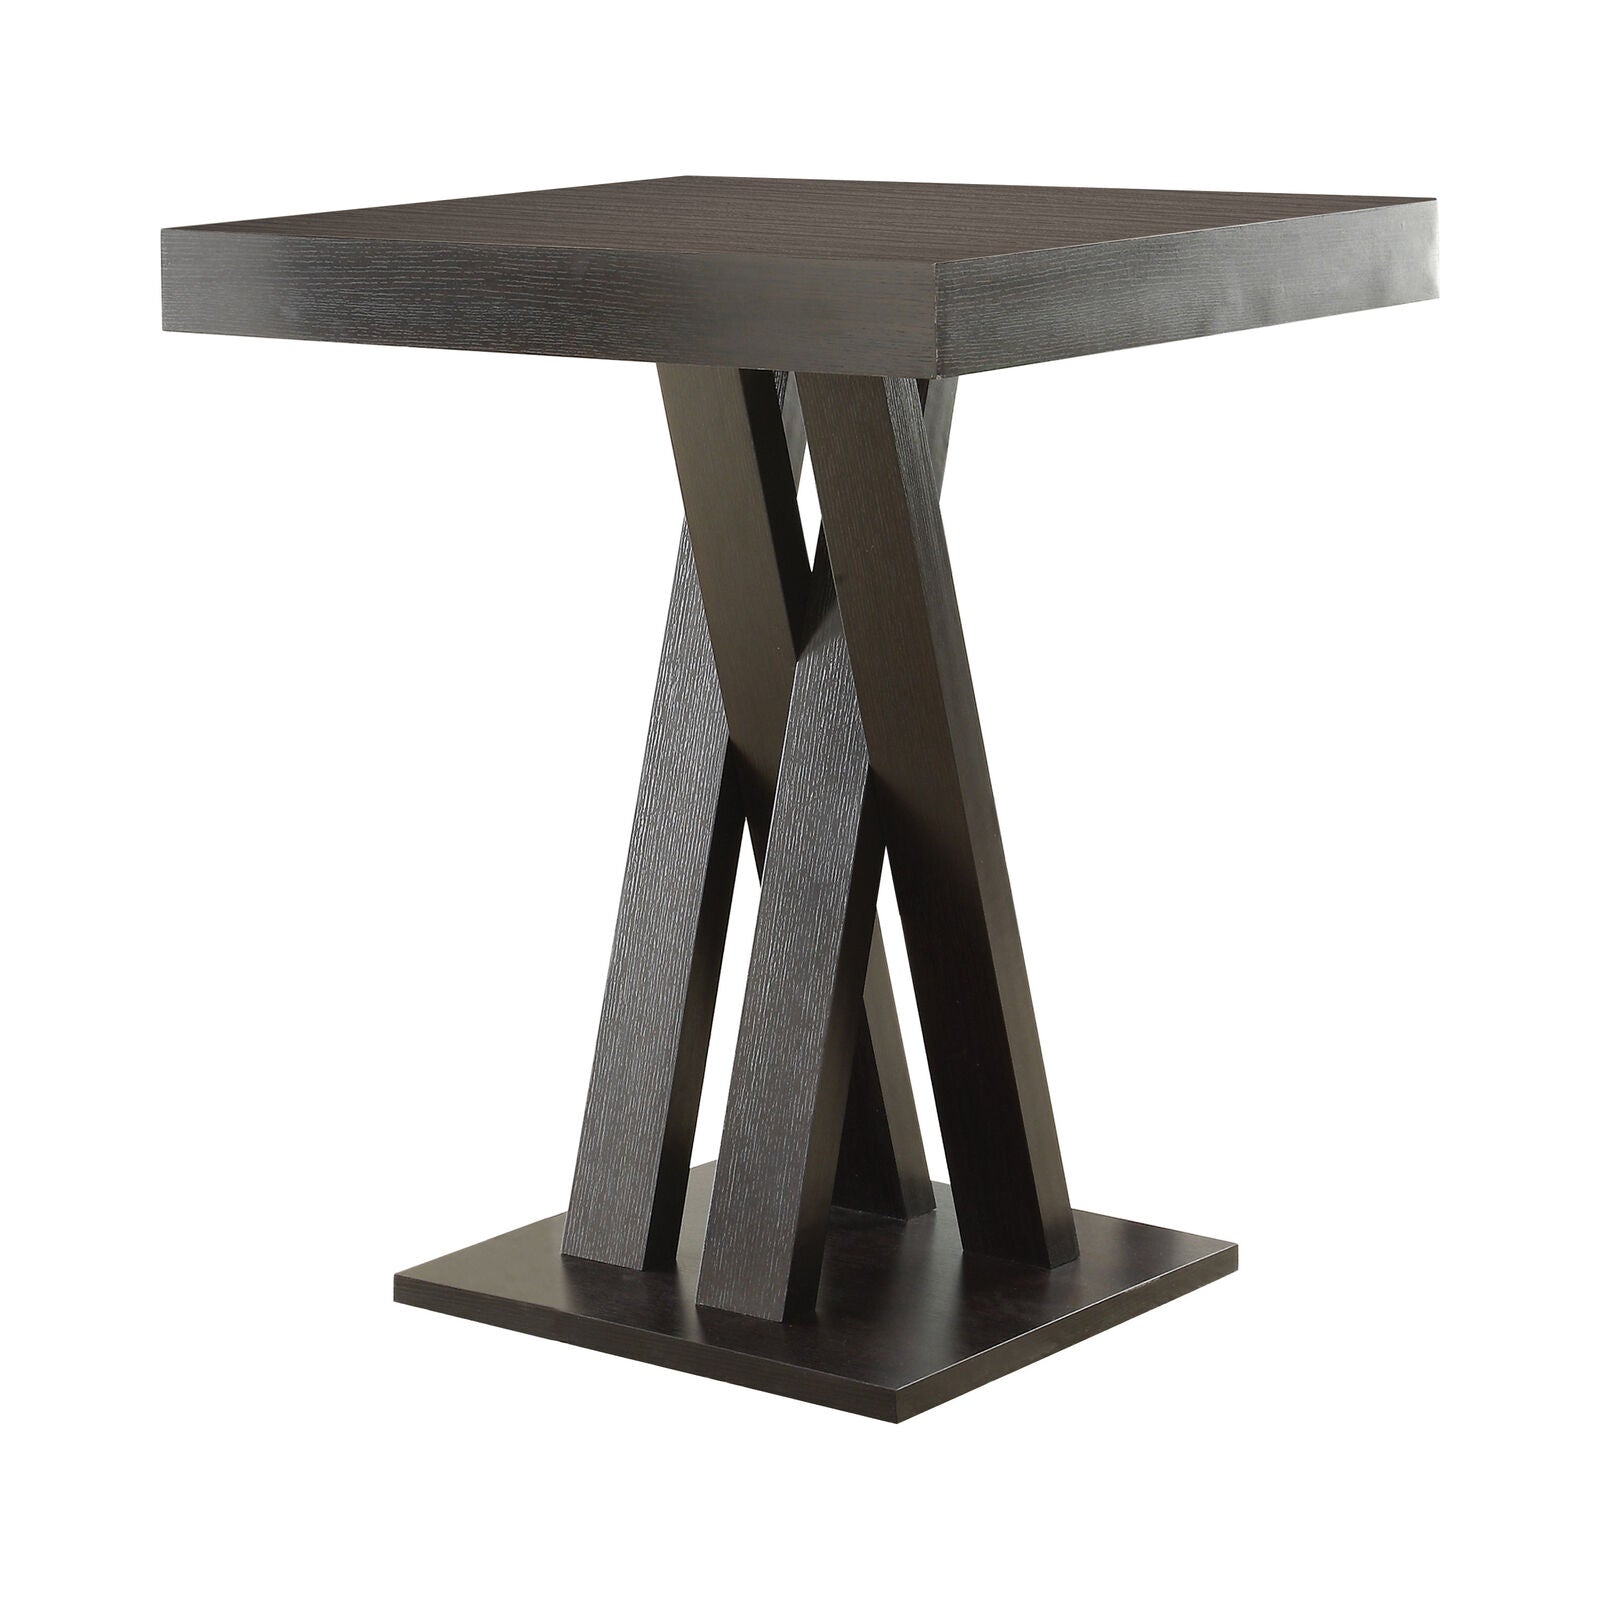 Contemporary Double X-Shaped Base Square Bar Gameroom Table Cappuccino